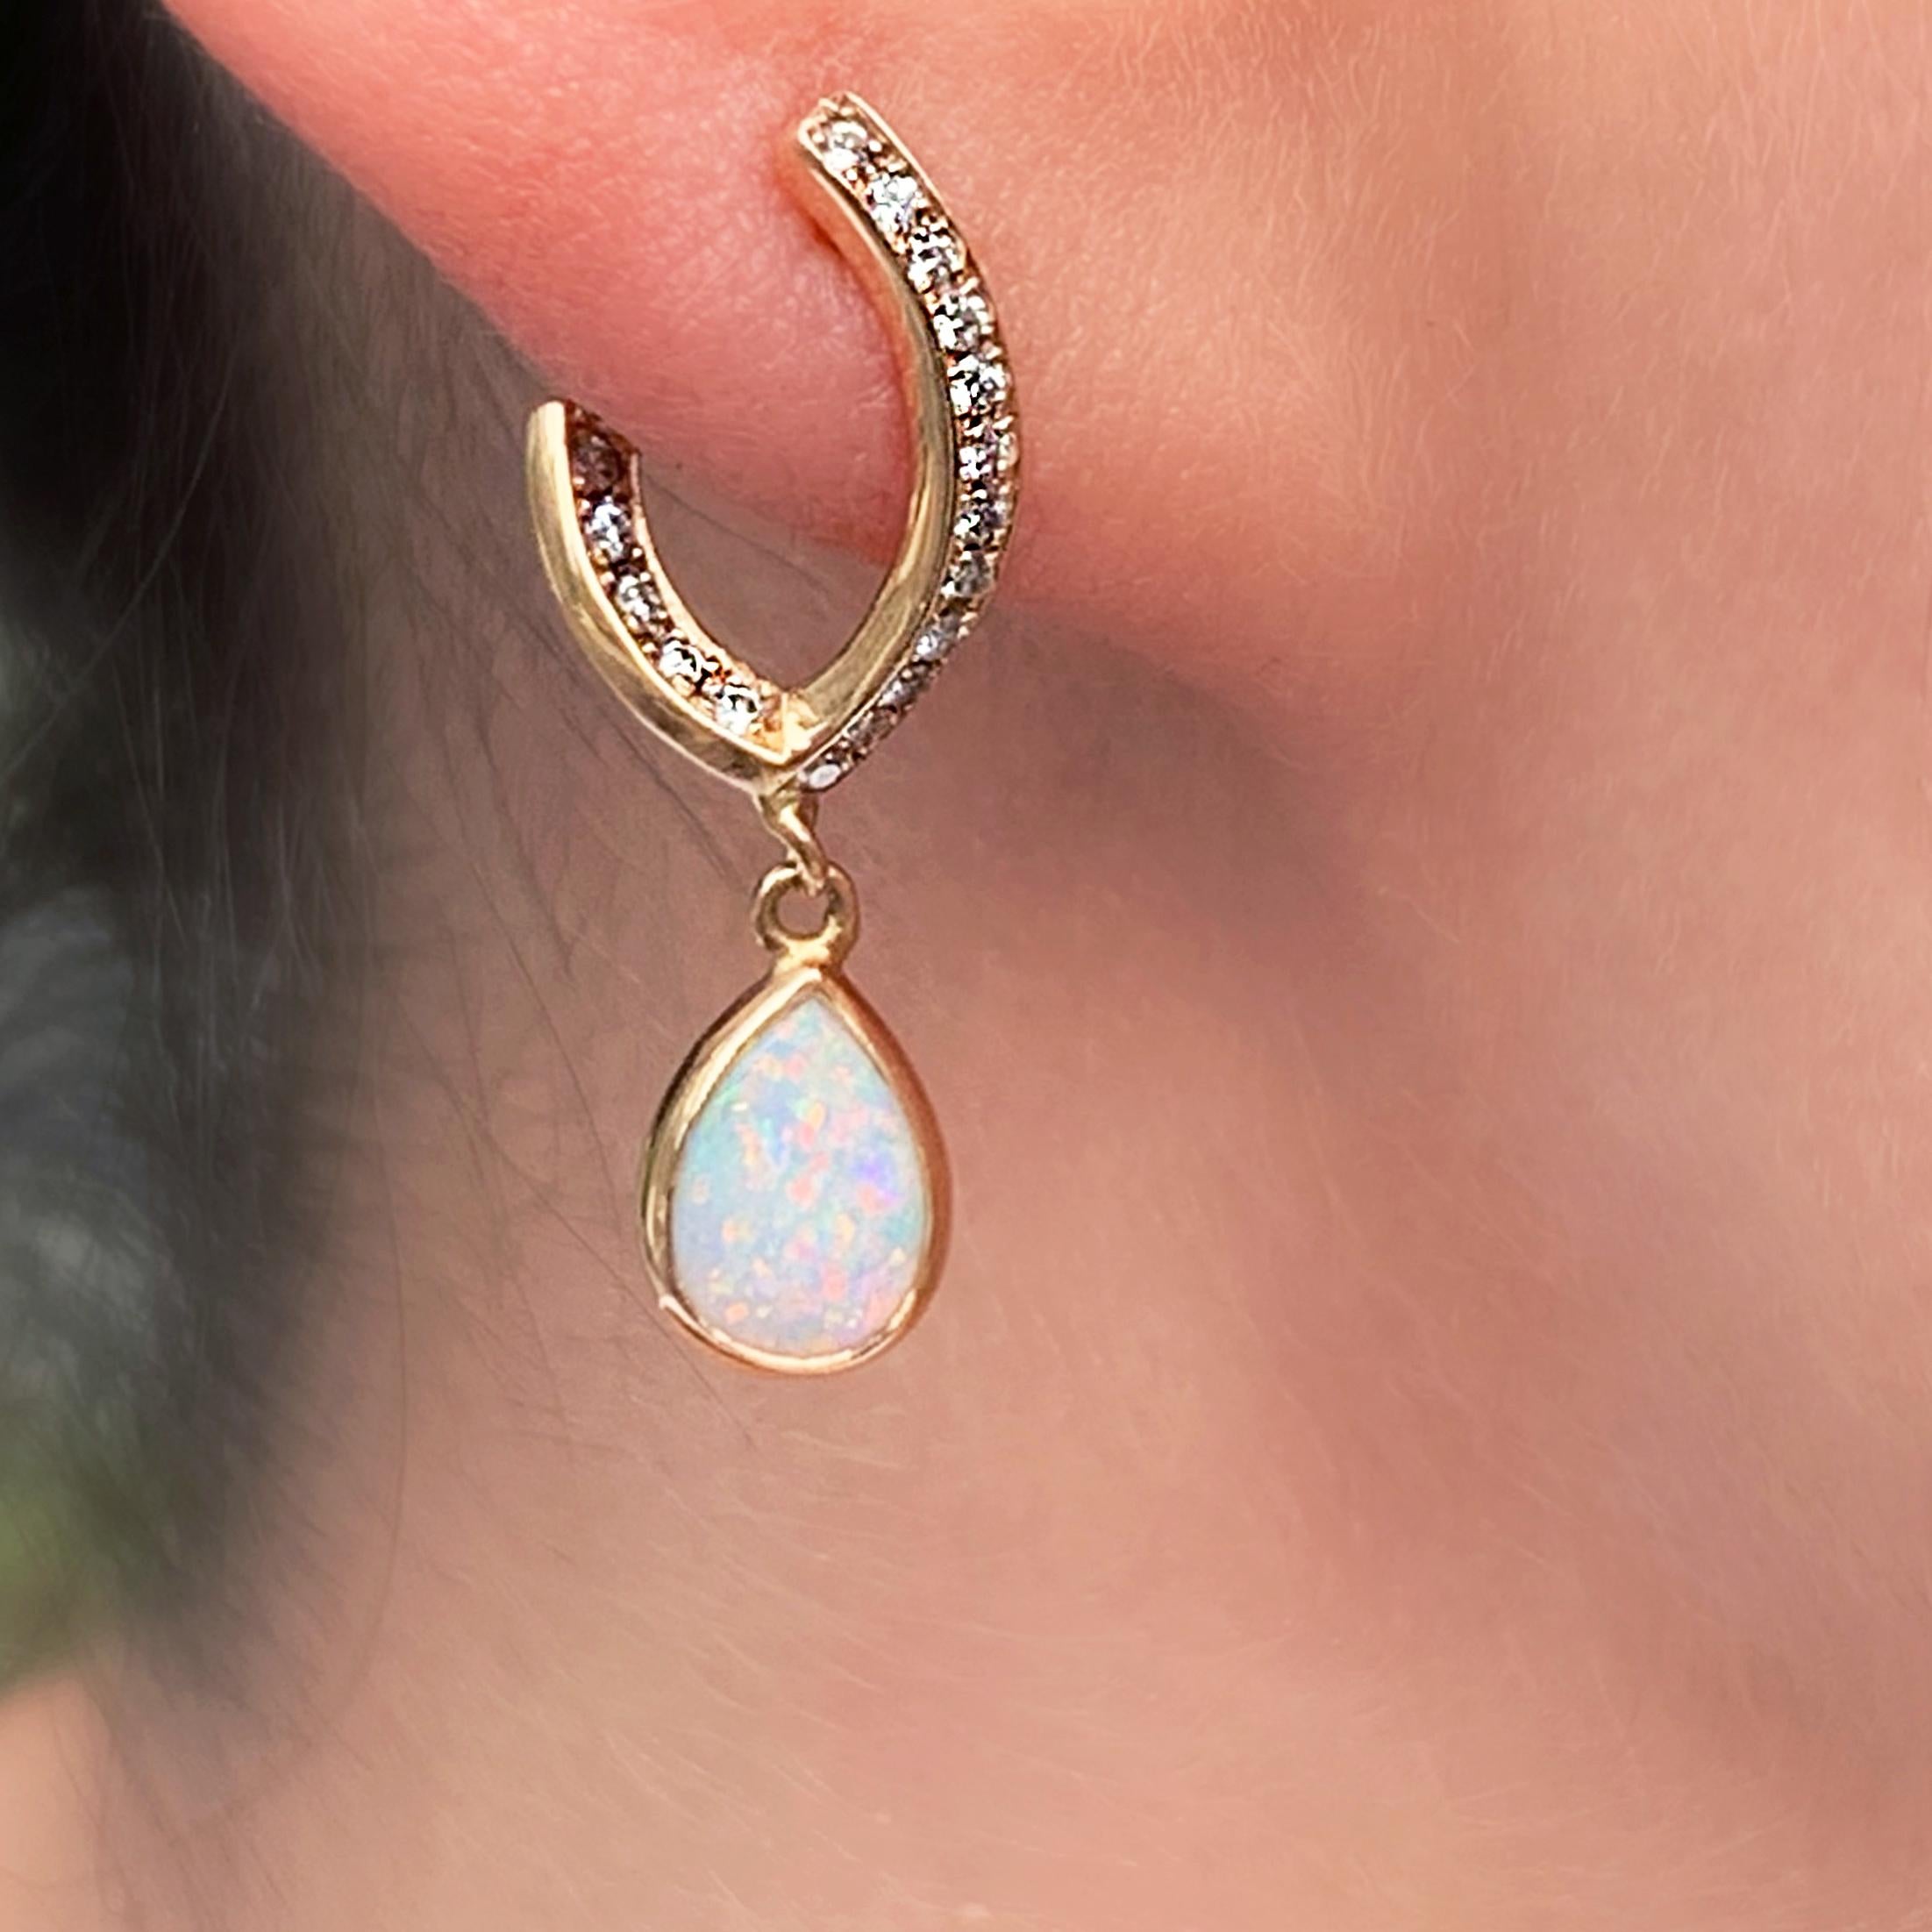 Drop earrings in 18K rose gold 3 g.  Pave set with white brilliant-cut DEGVVS diamonds 0,23 ct. and 2 white Australian opal pear shape drops in bezel setting. Collection 'Opale Fatale' 
This exquisite product comes from Joke Quick, a jewellery